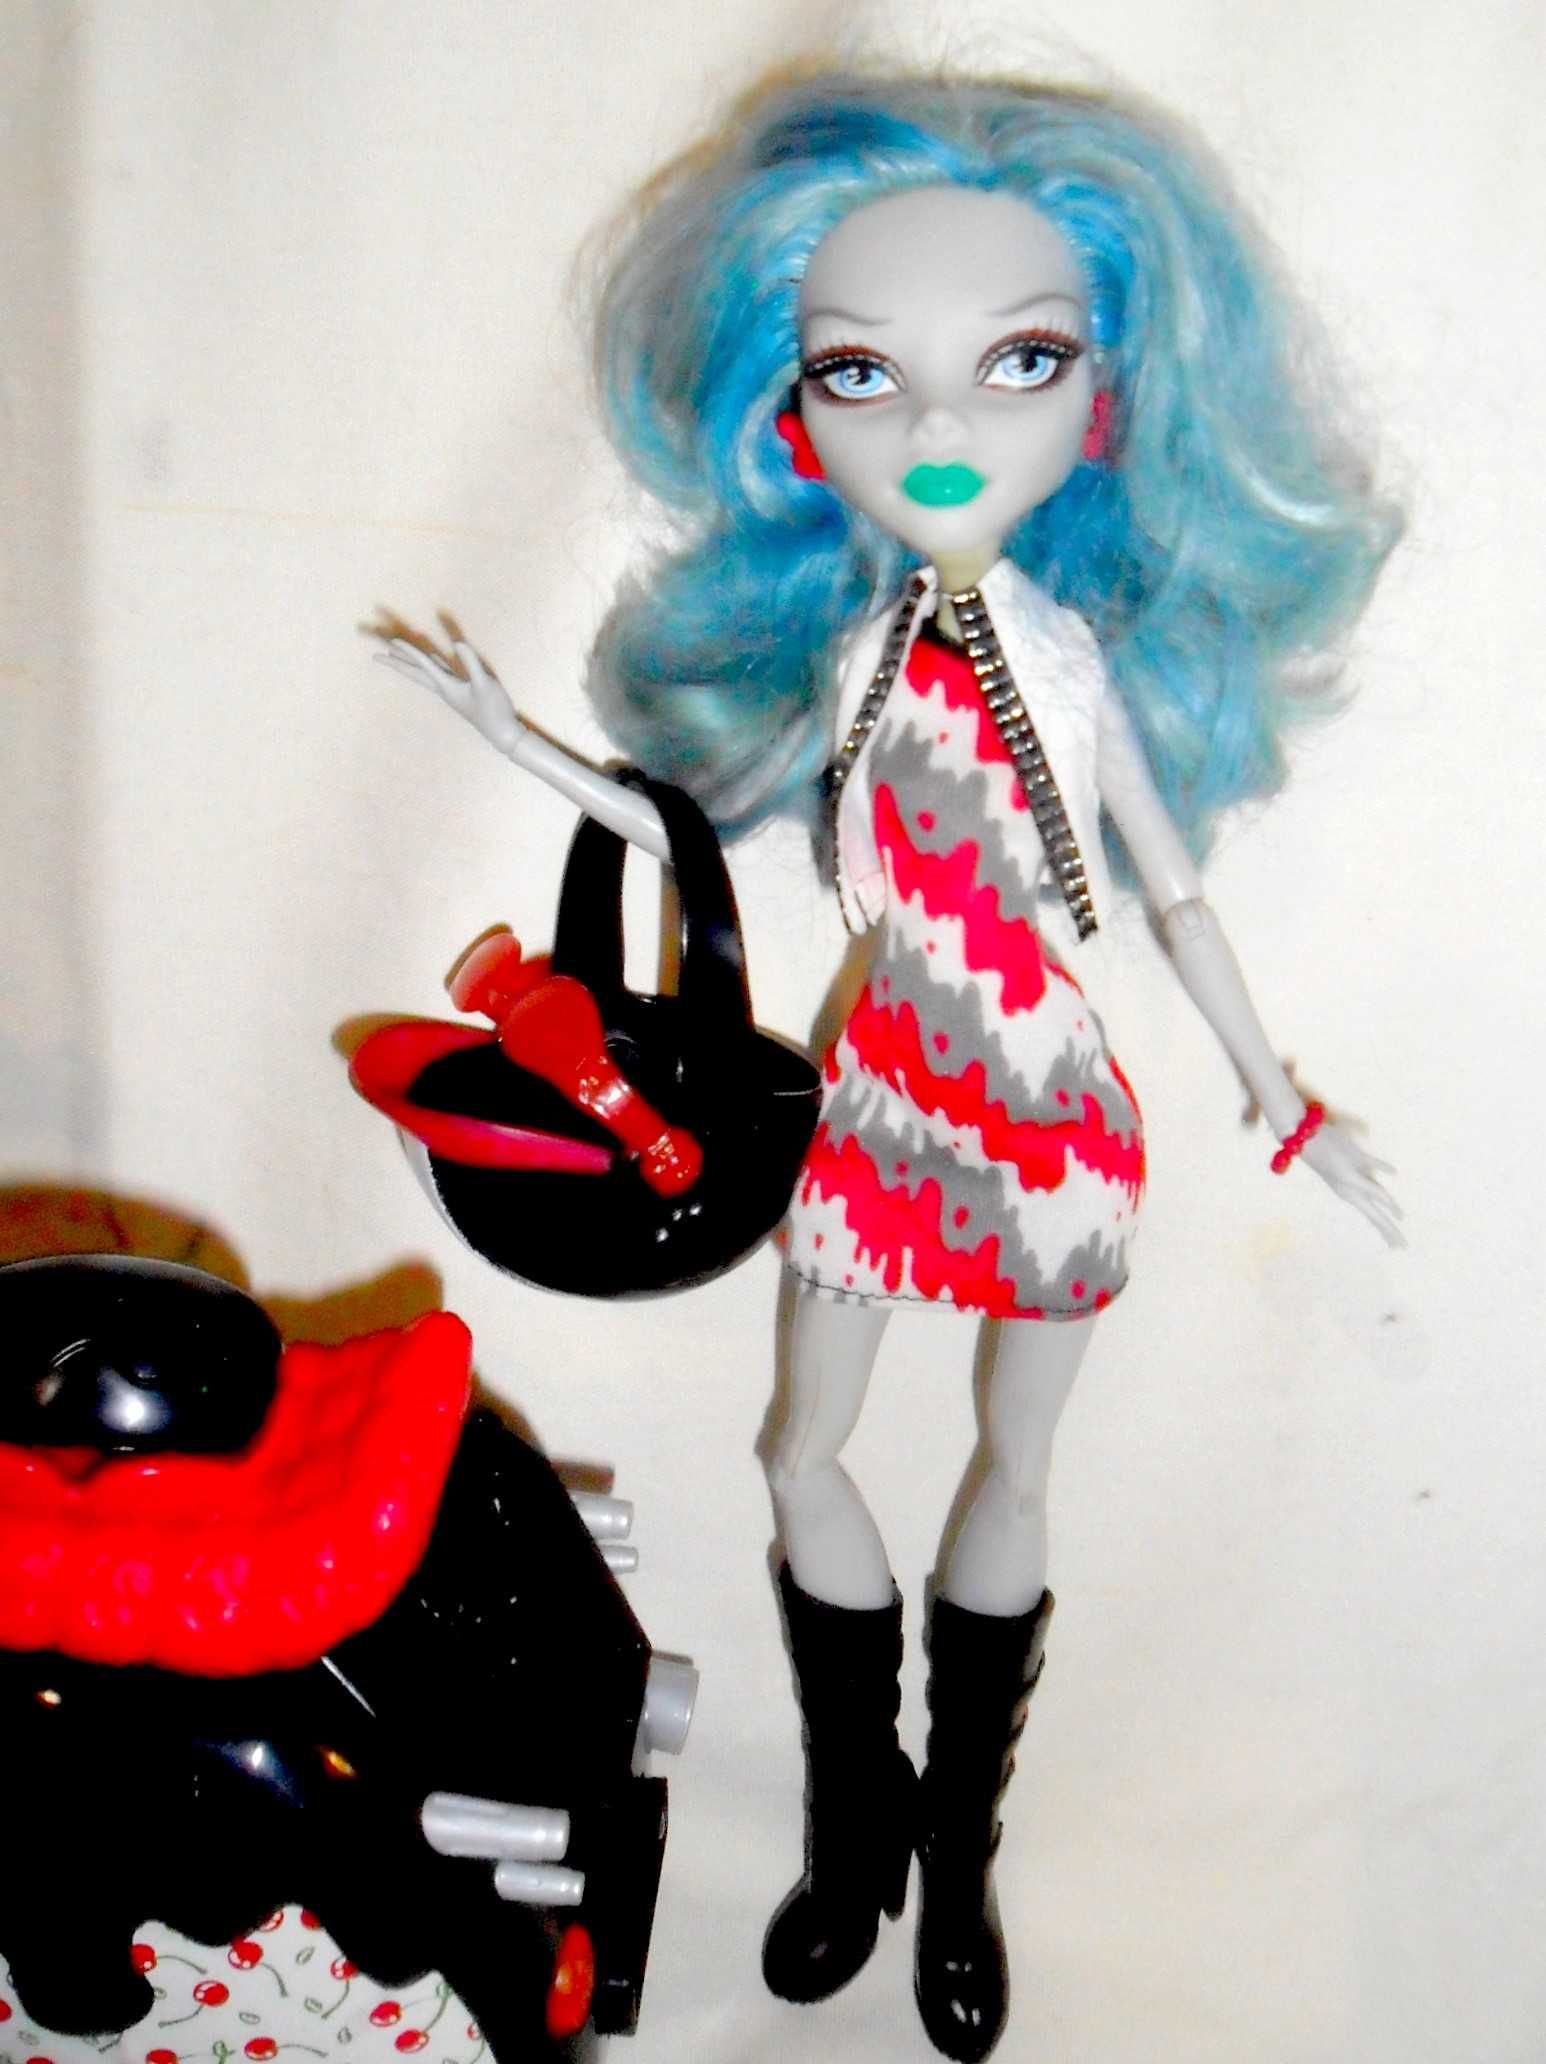 Monster High lalka Ghoulia Yelps i Scooter